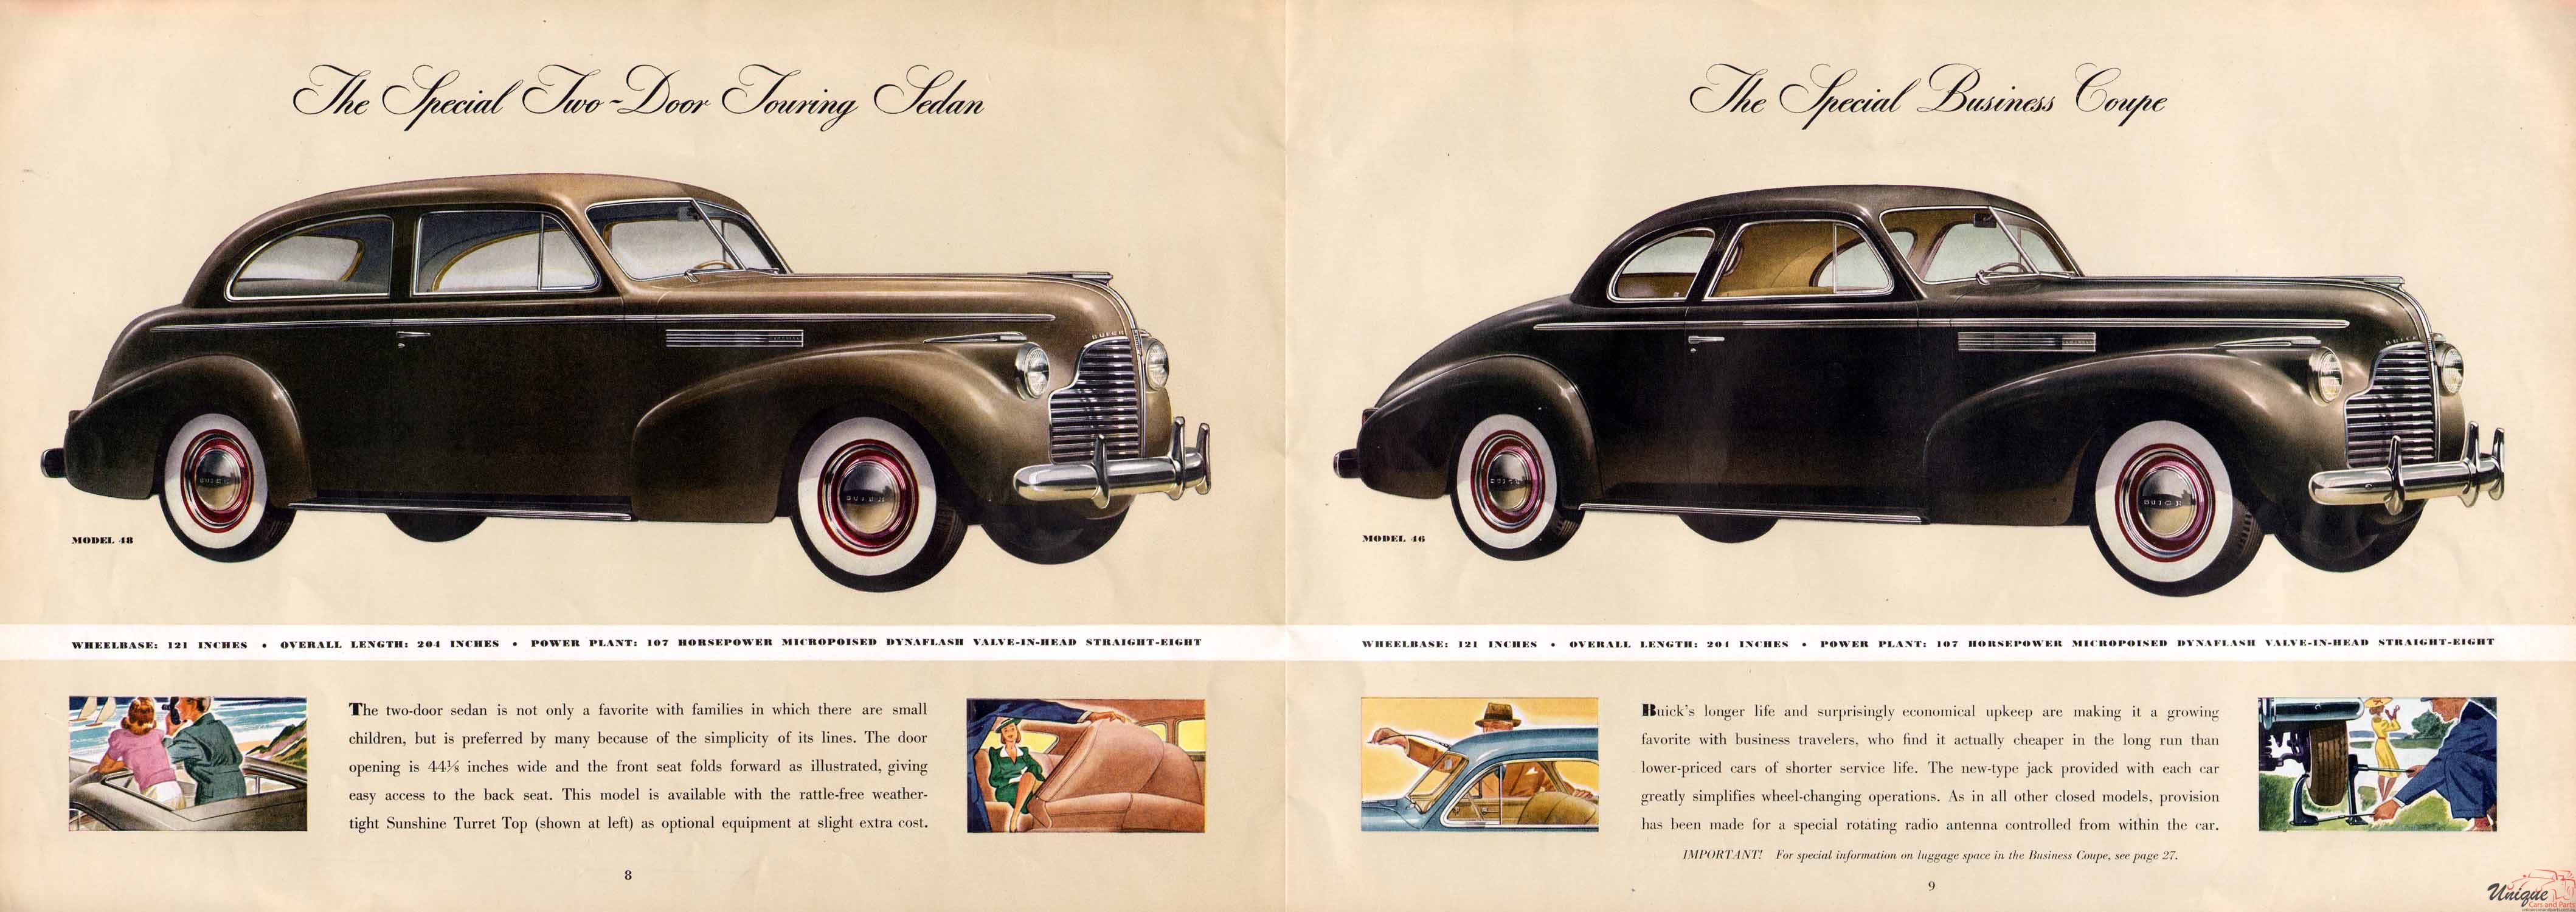 1940 Buick Brochure Page 11